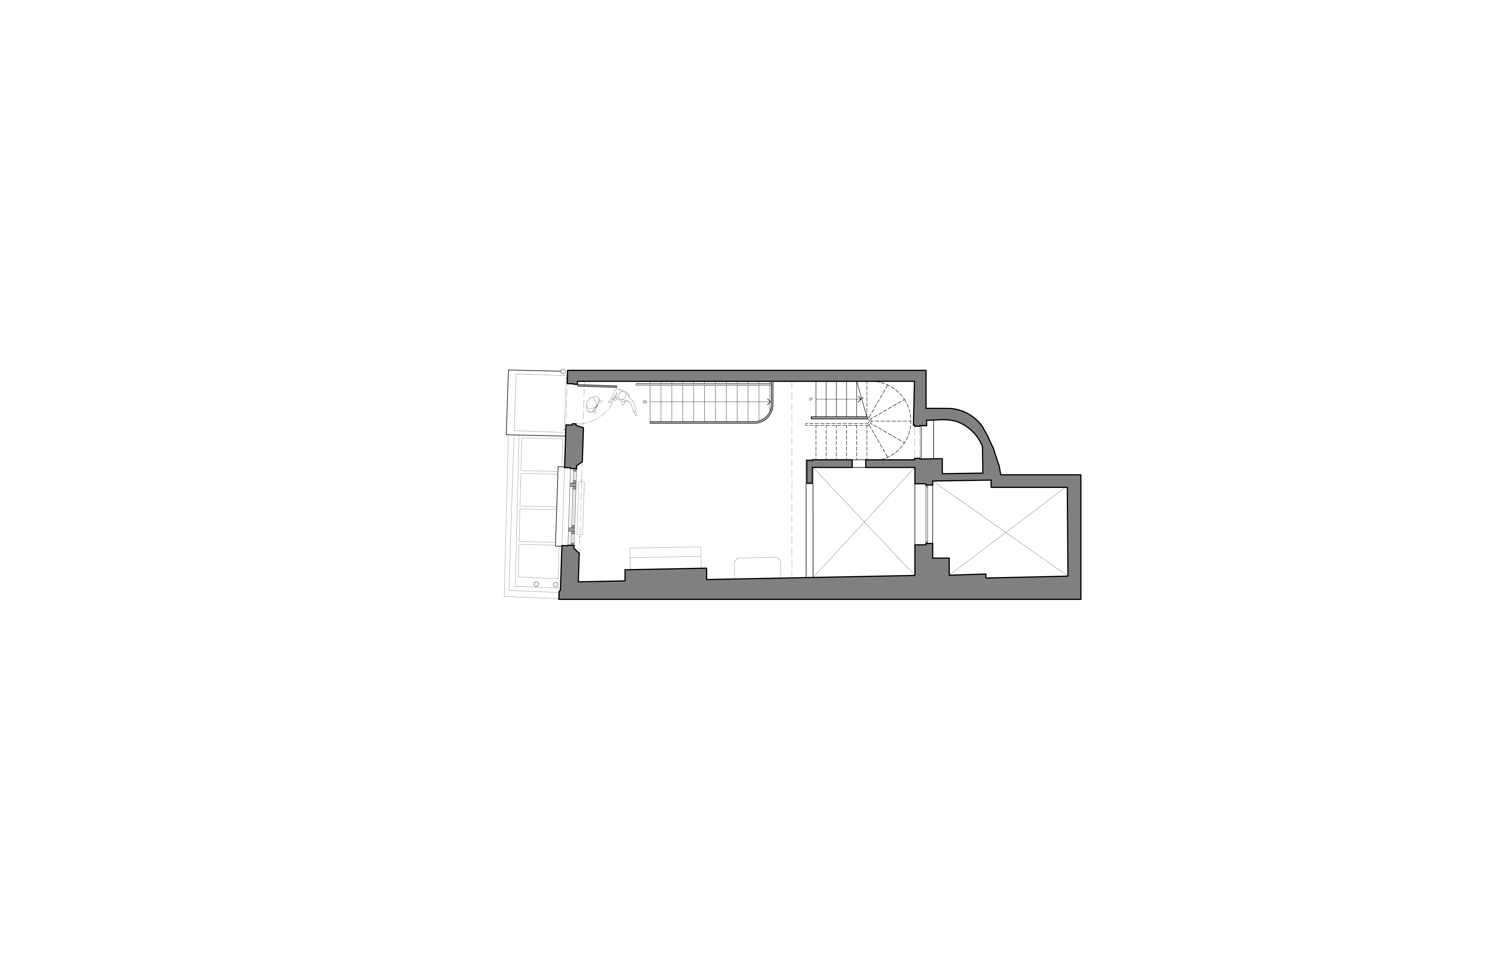 Ground floor plan, courtesy of Architensions